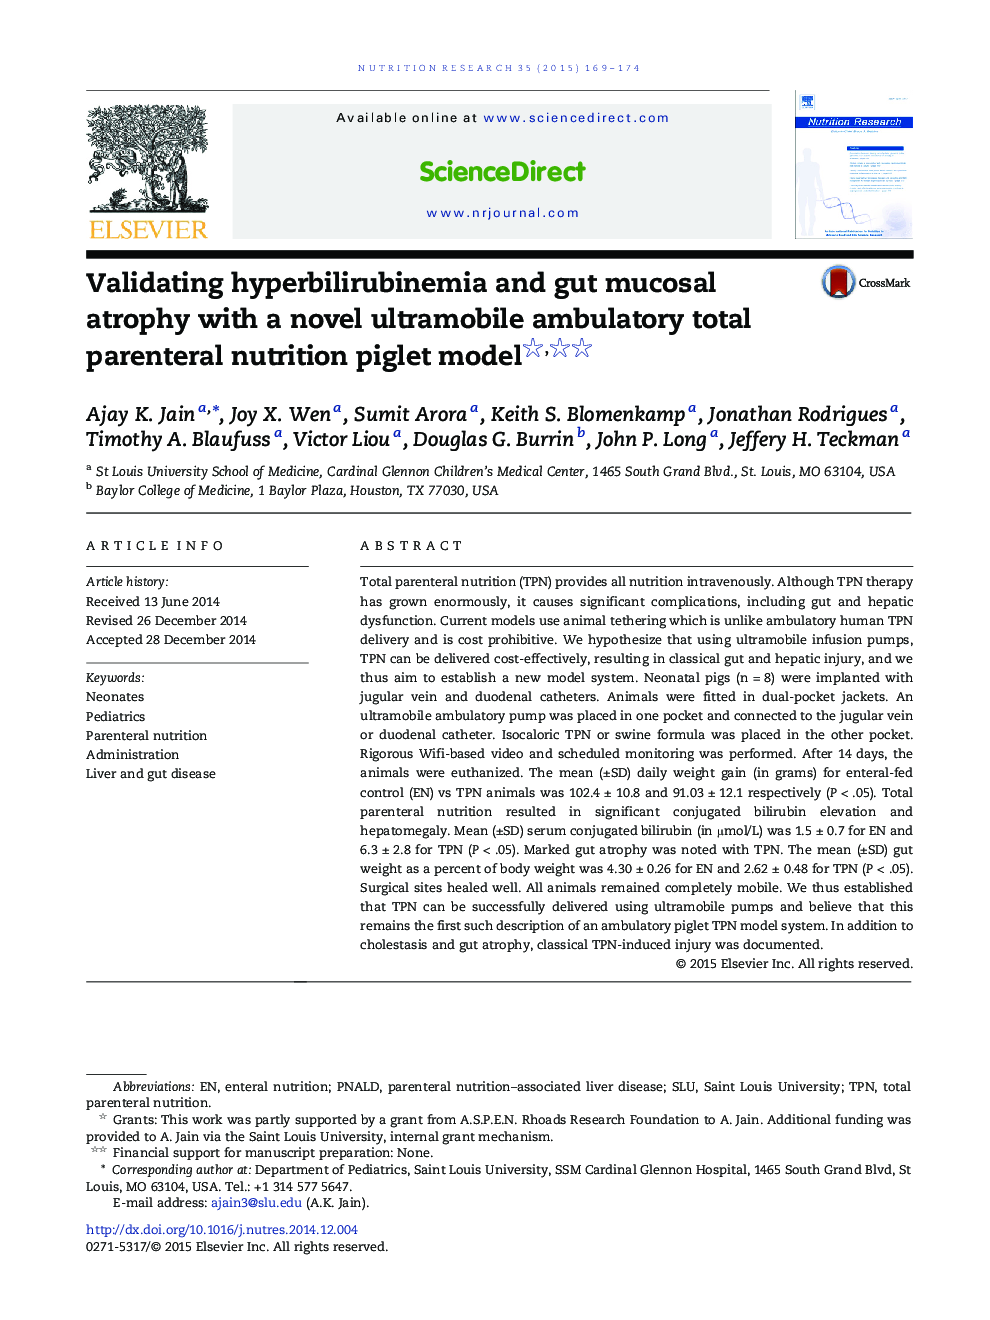 Validating hyperbilirubinemia and gut mucosal atrophy with a novel ultramobile ambulatory total parenteral nutrition piglet model